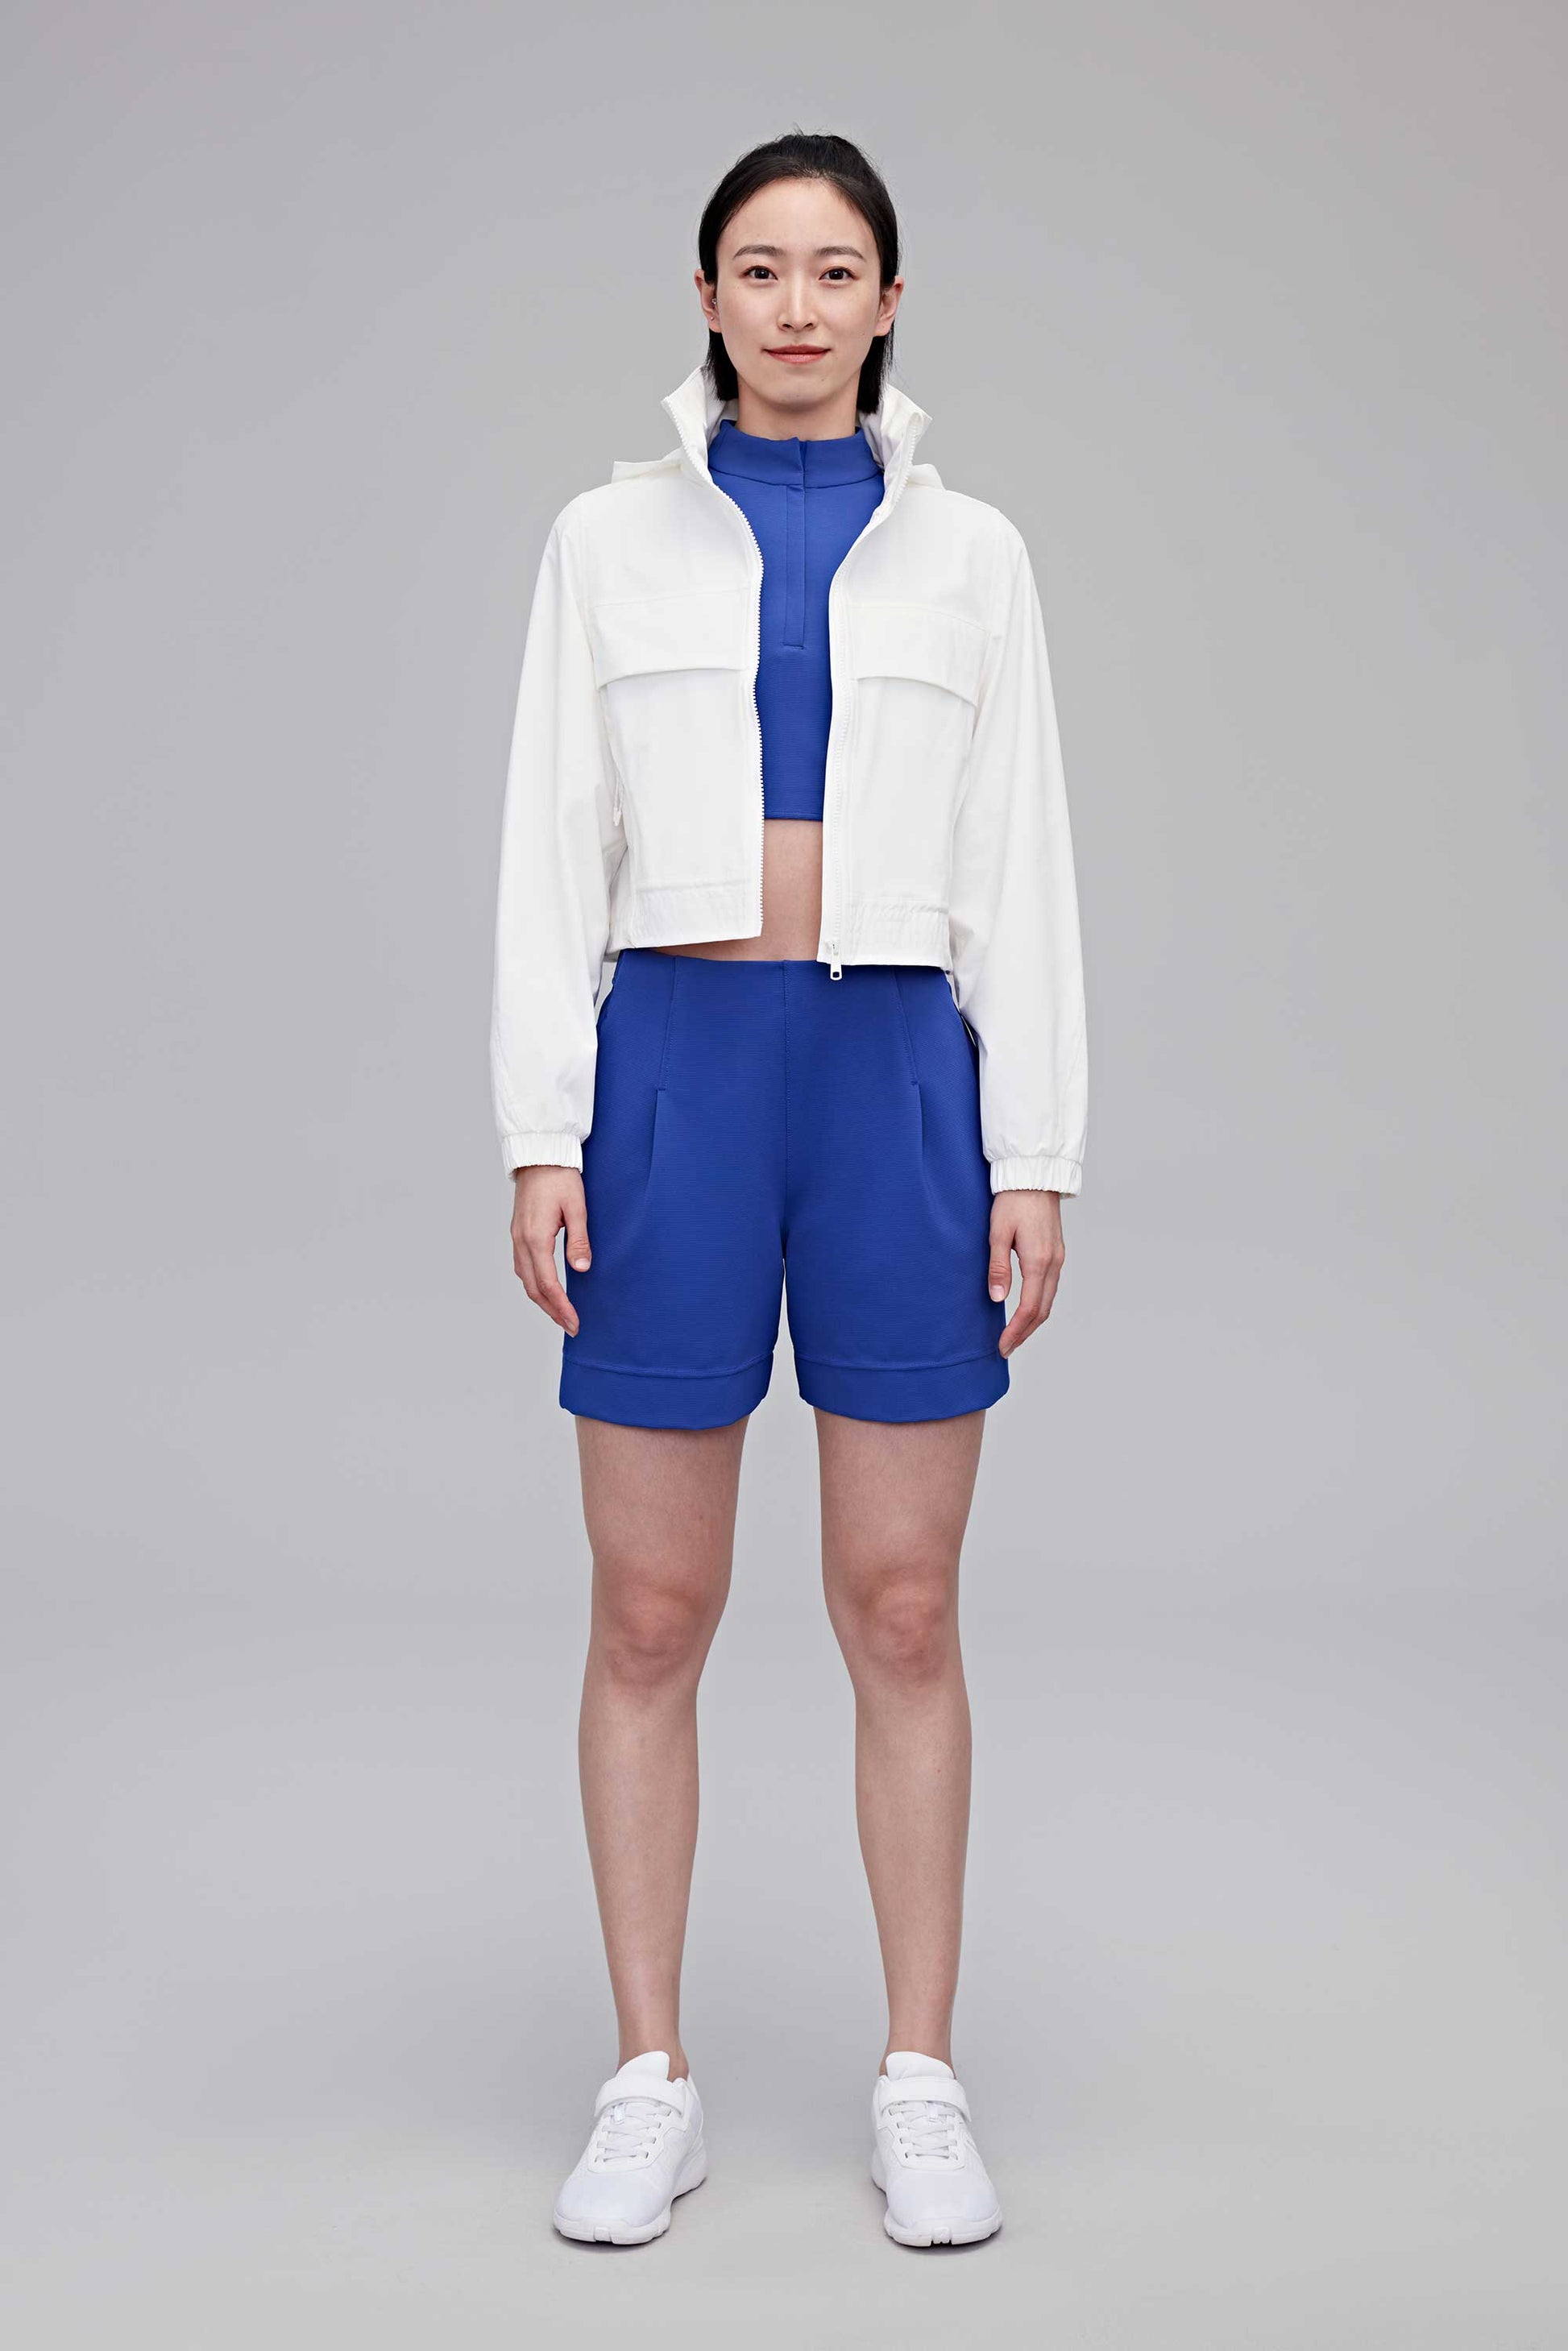 woman in white jackets, blue tank and blue shorts